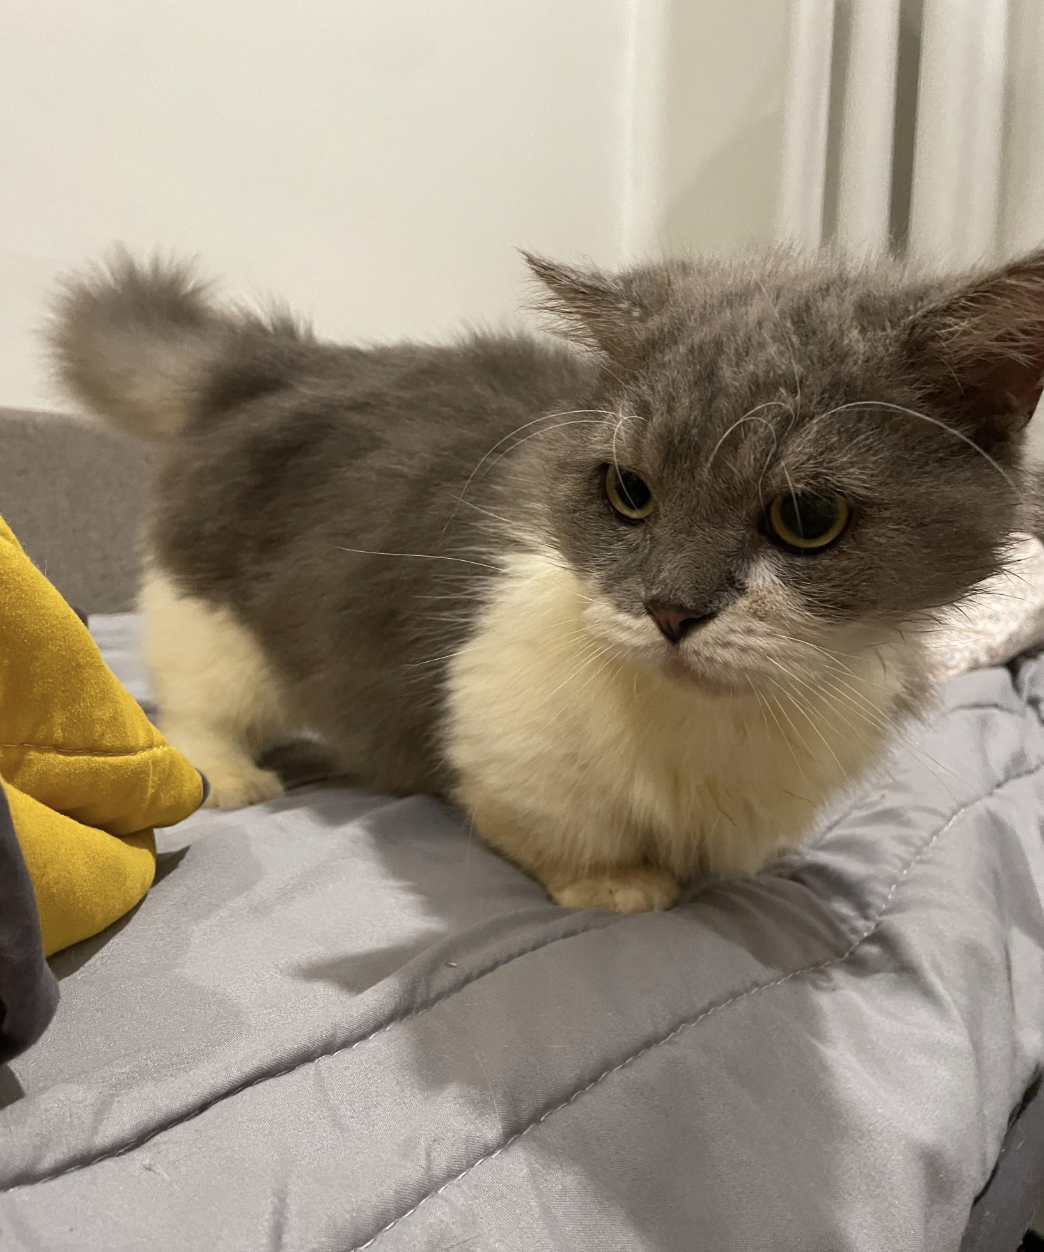 Fluffy gray and white cat sitting on a bed beside a yellow pillow